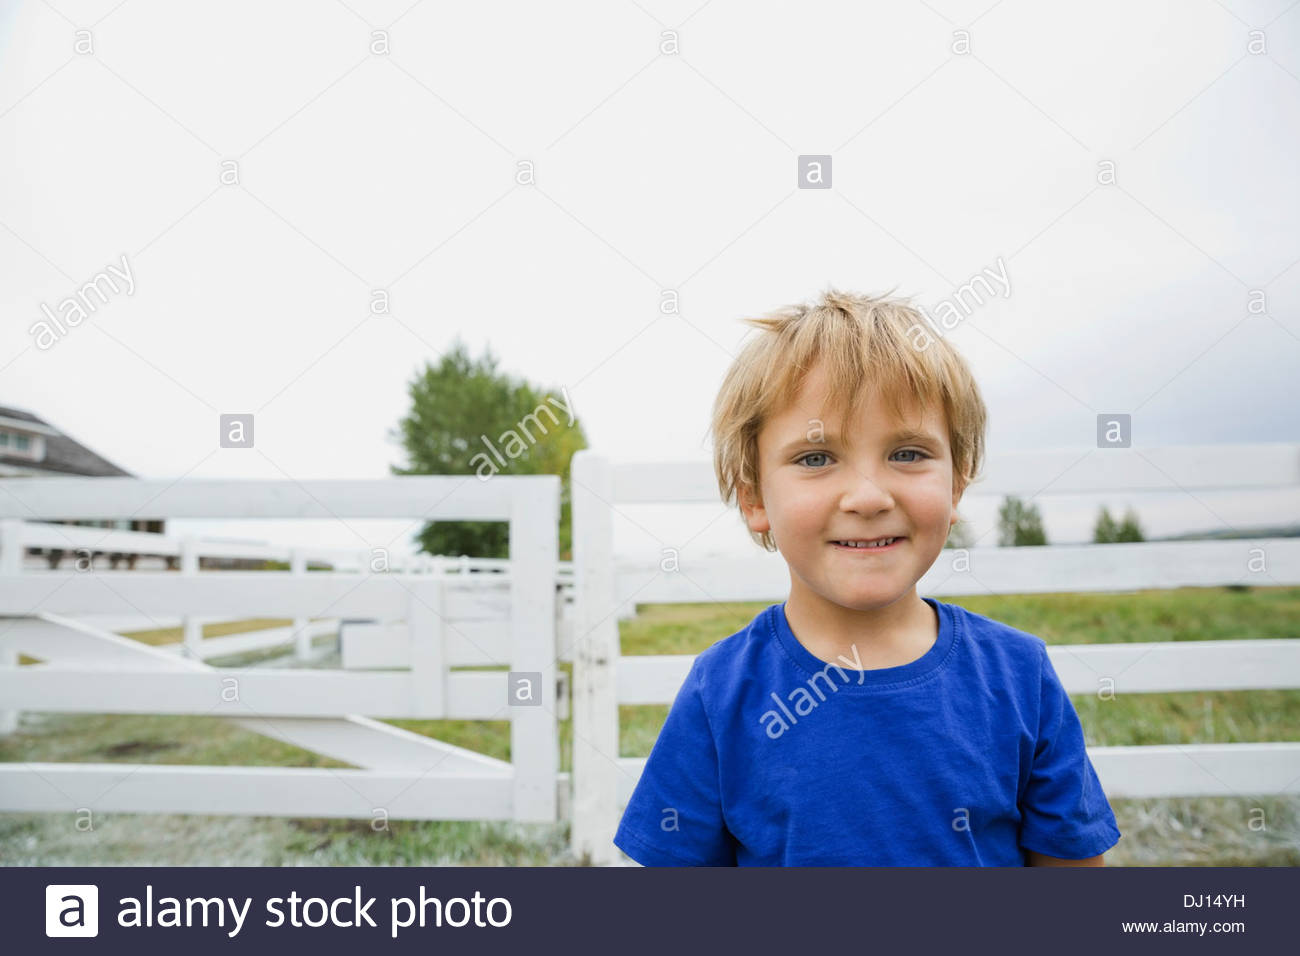 Portrait of smiling boy standing outdoors Stock Photo